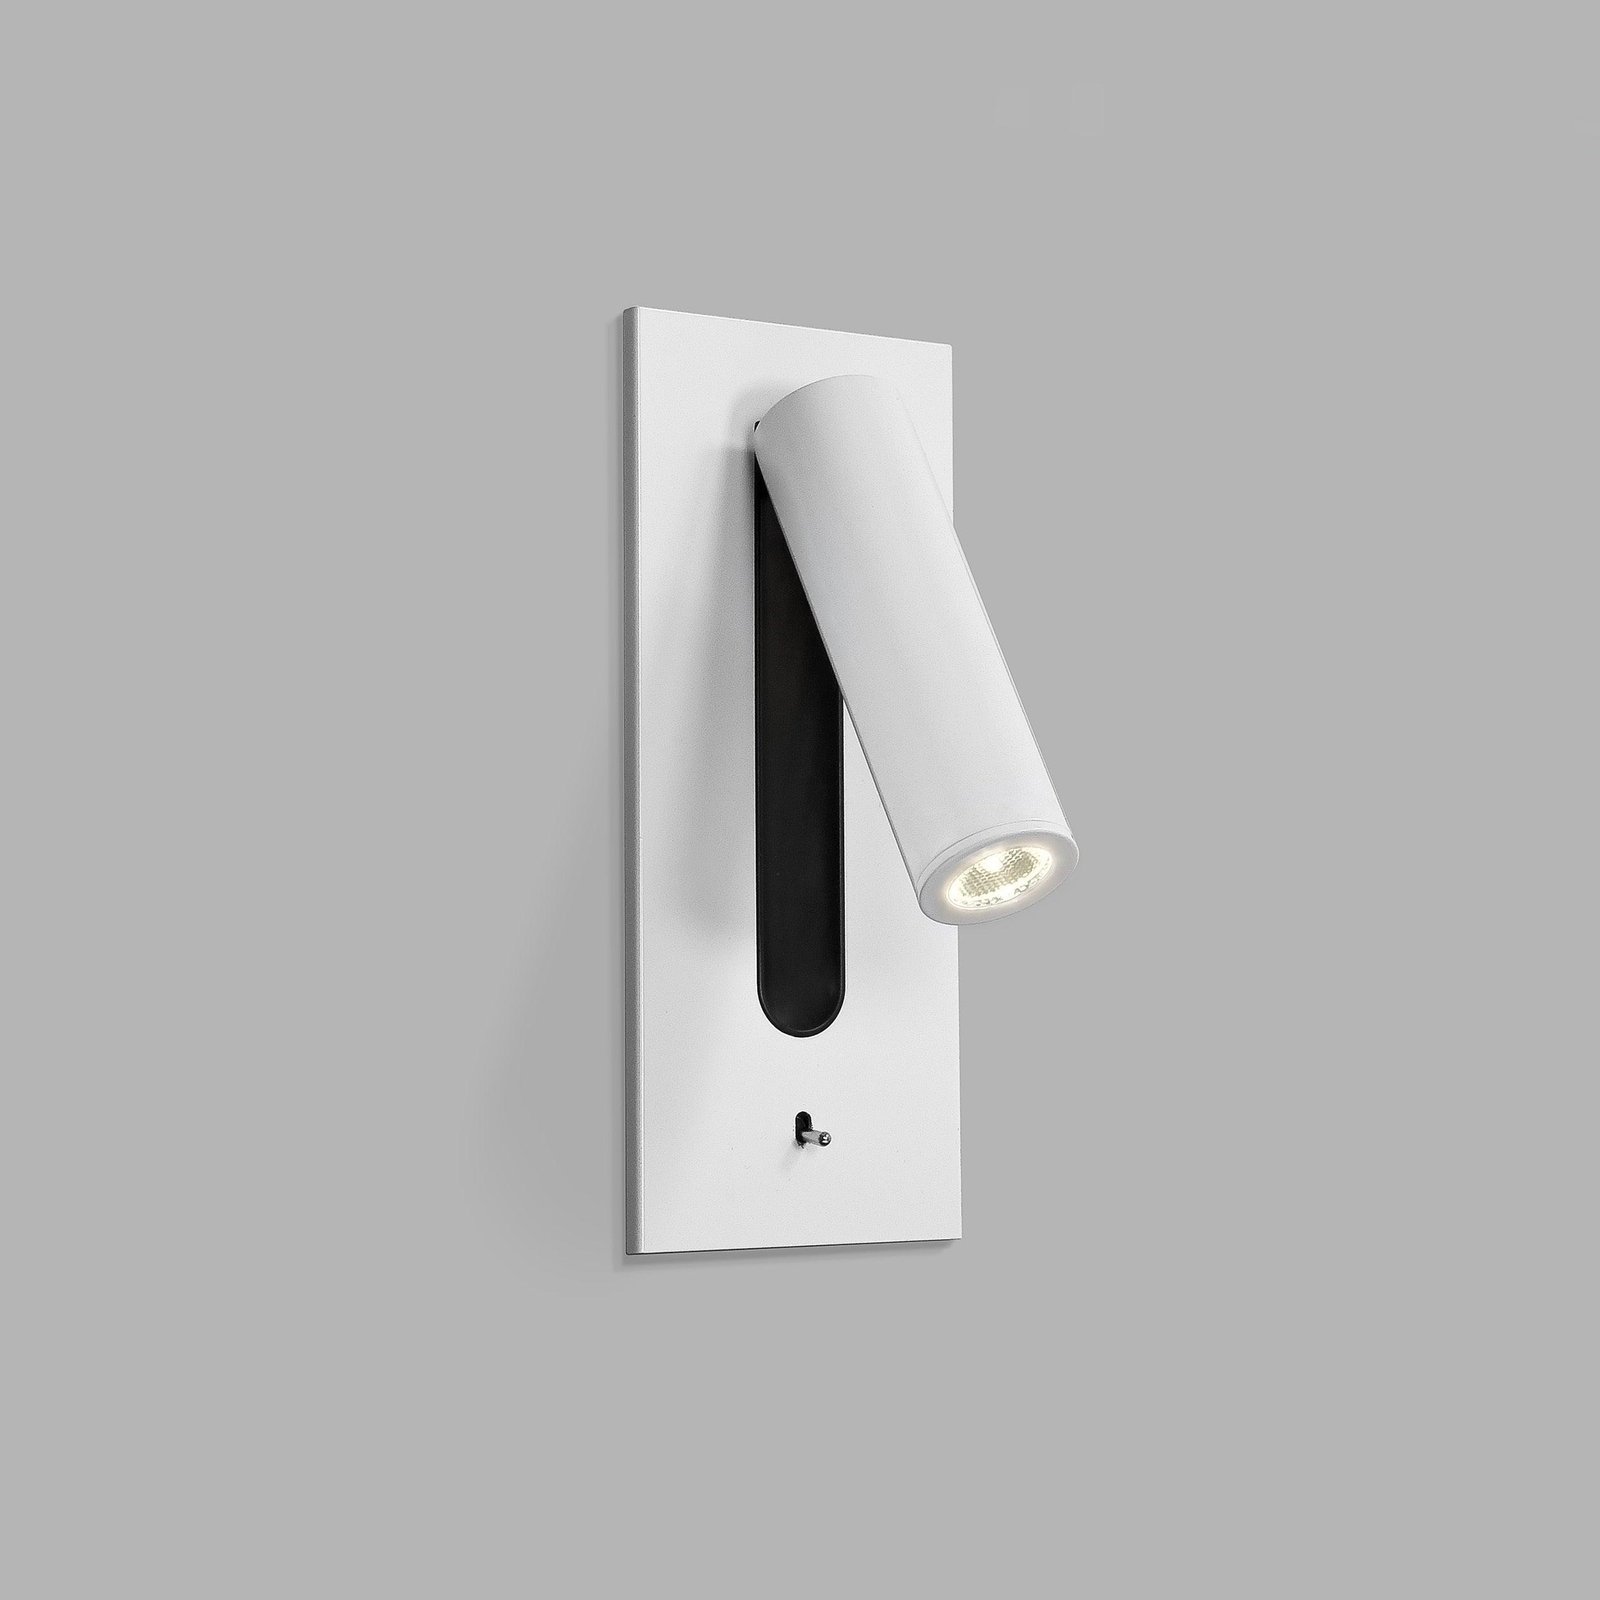 Matt White Switched LED Sconce with Fuse, Diameter 7.8cm x Height 18.3cm*2, emitting Cool White light.